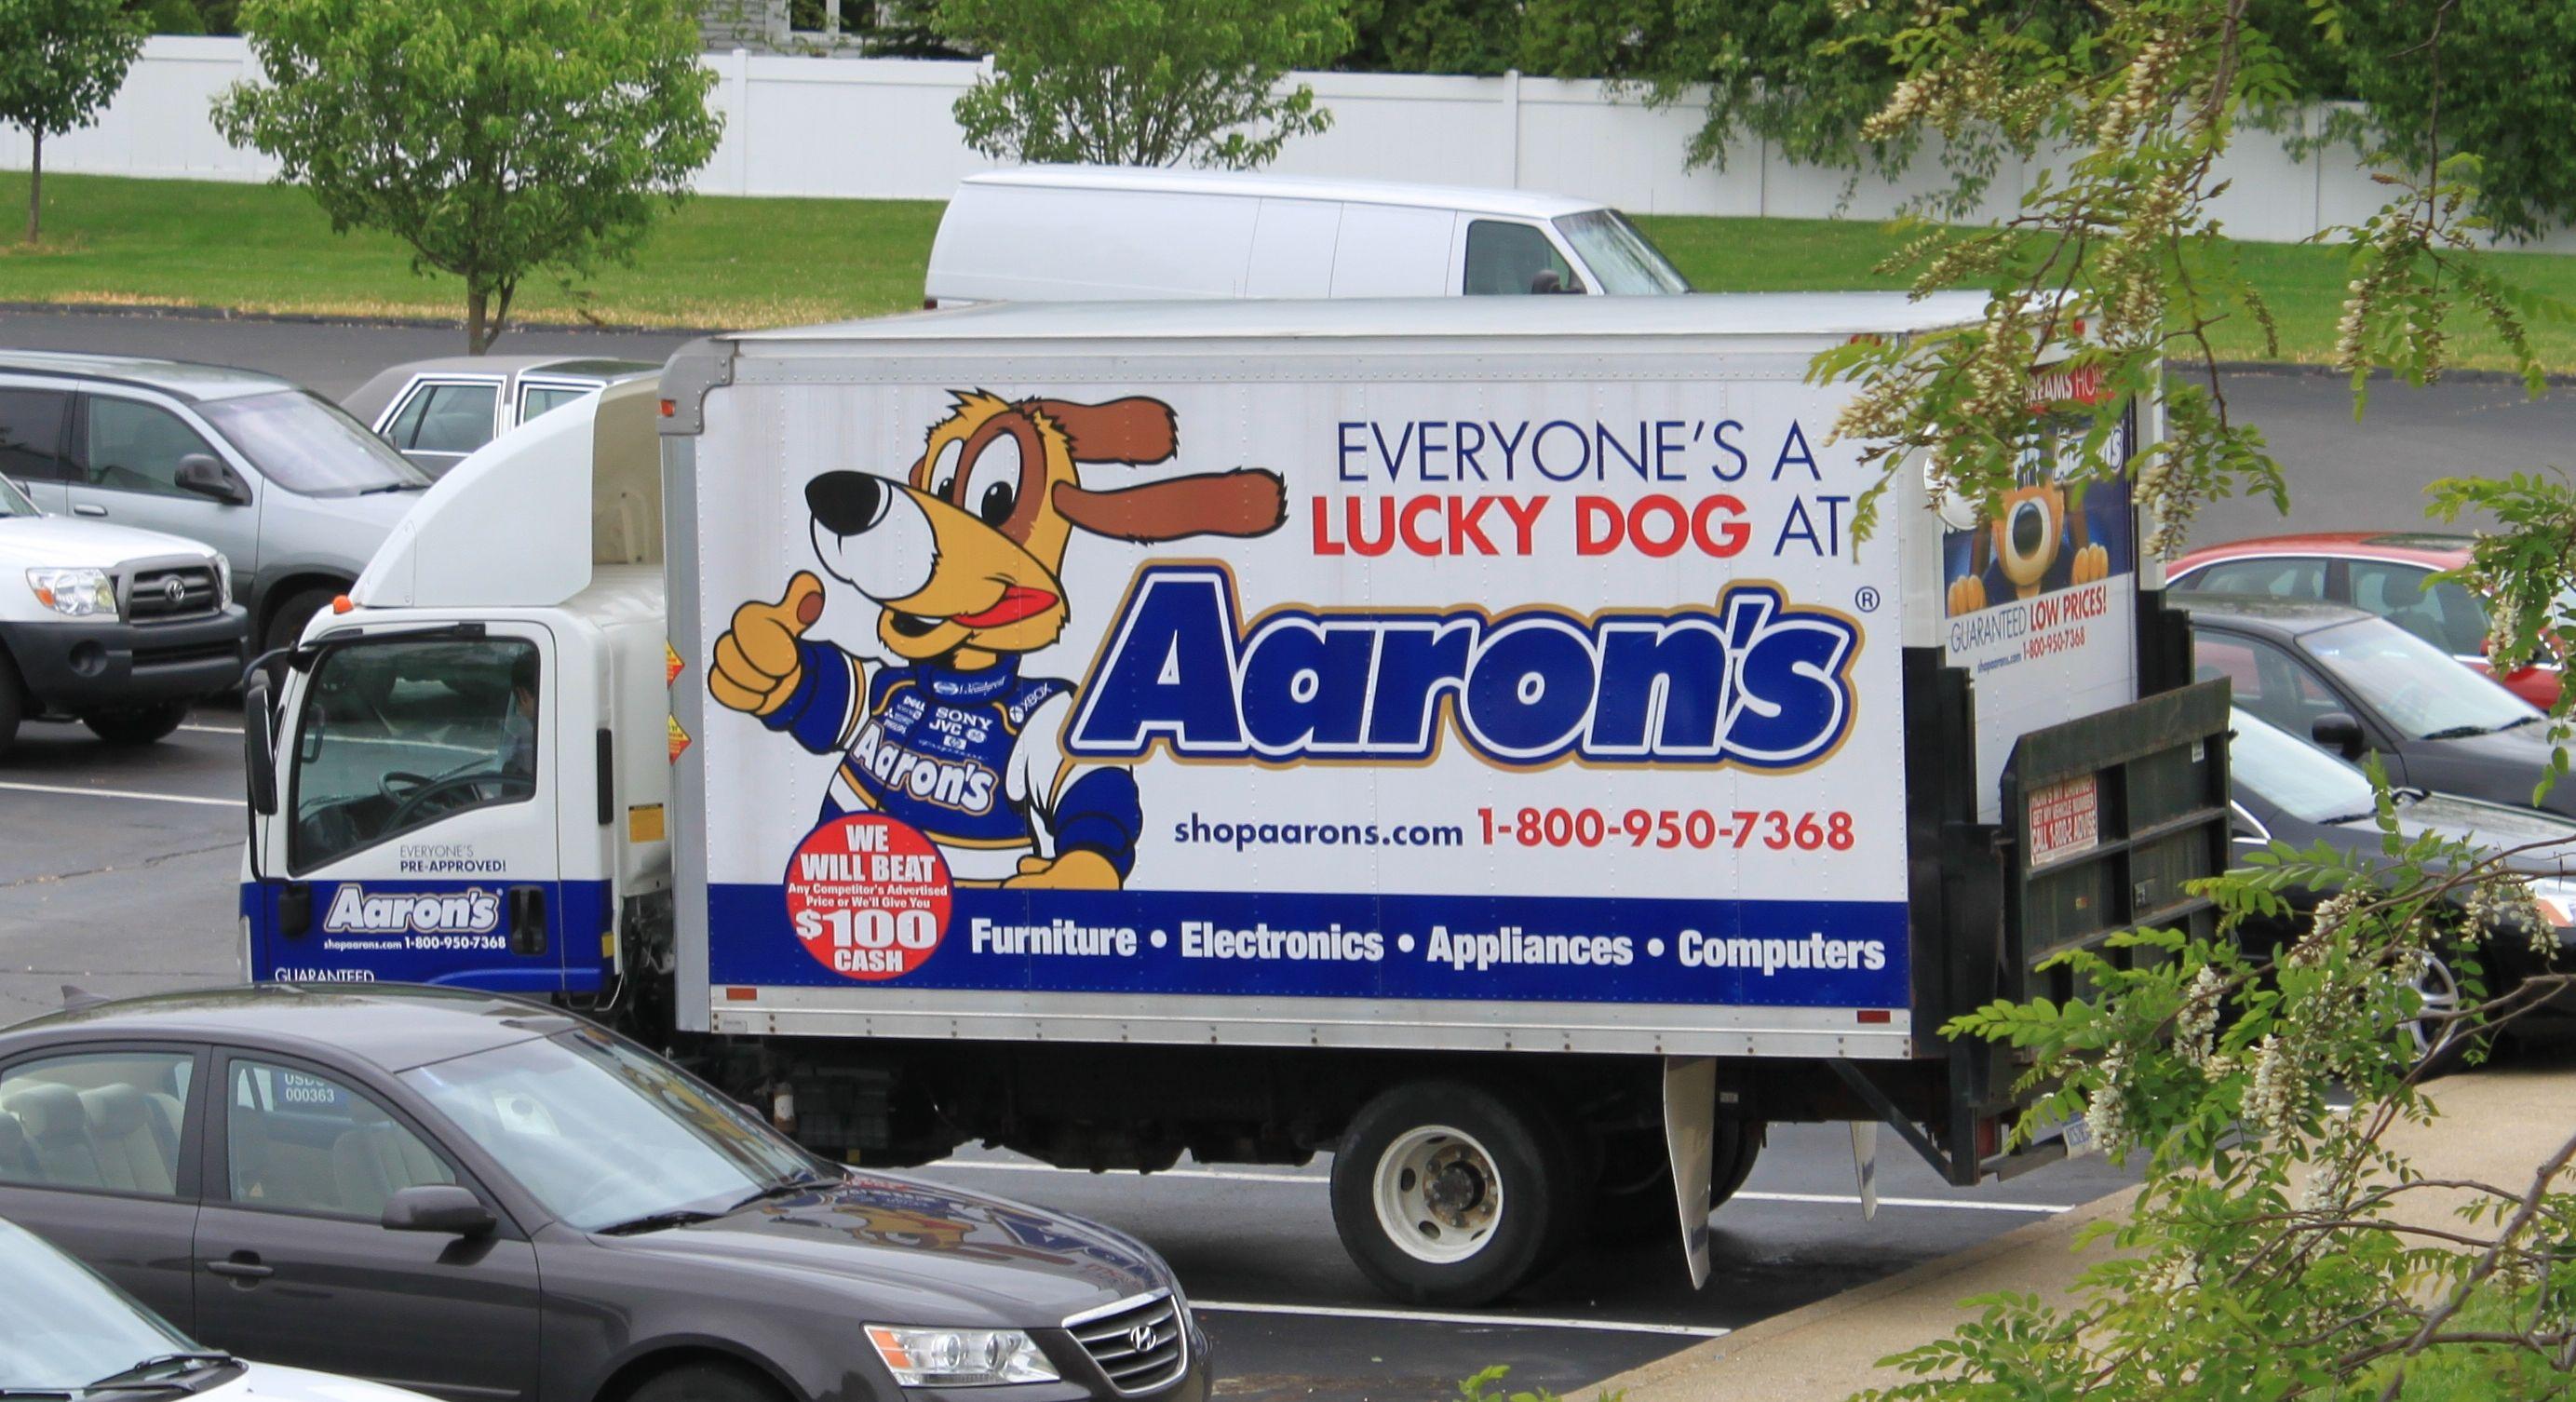 Aaron's Dog Logo - File:Aaron's delivery truck.JPG - Wikimedia Commons